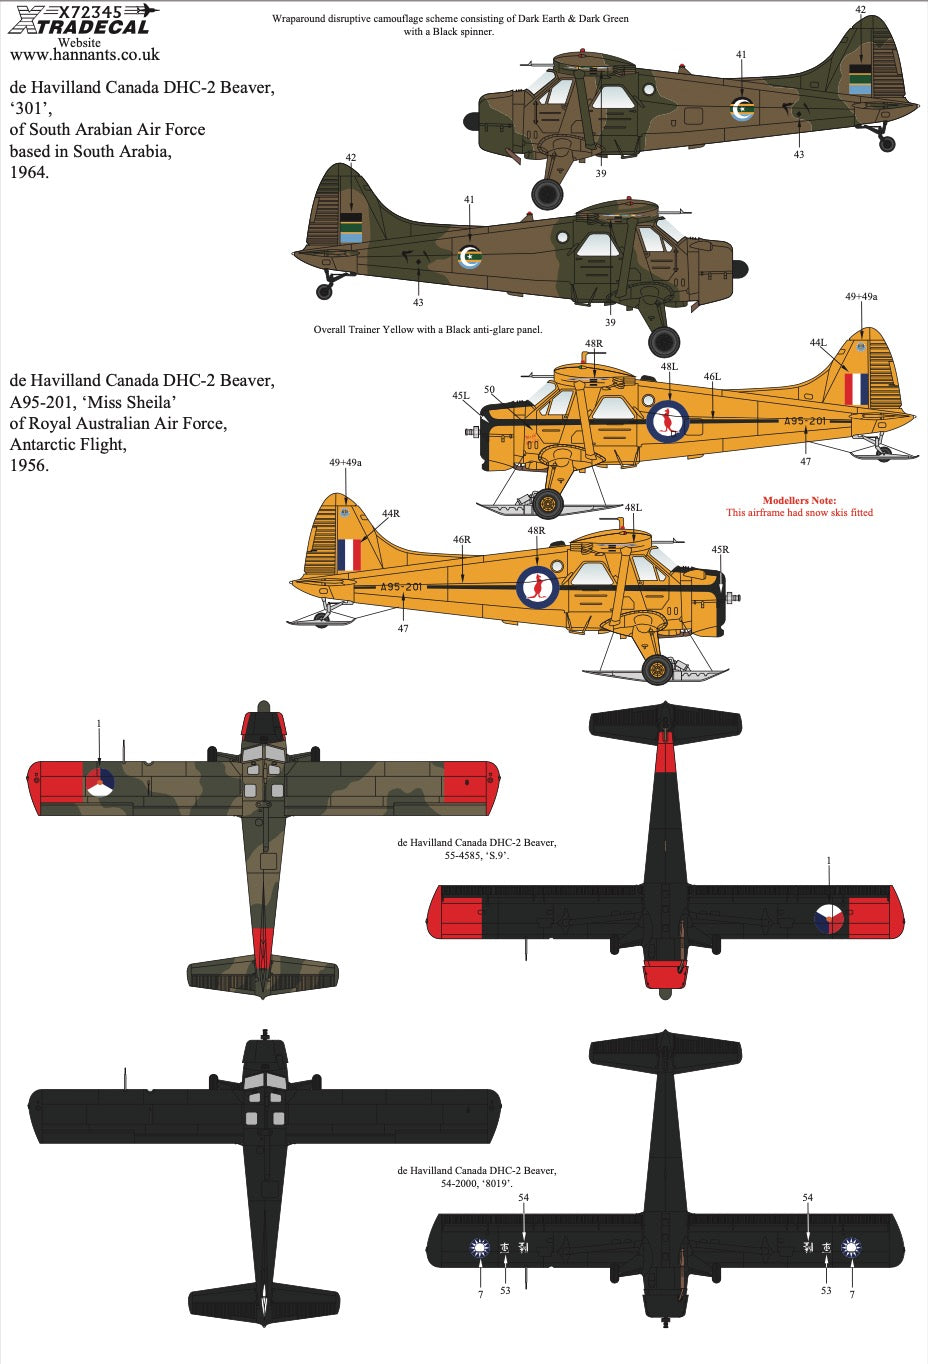 Xtradecal X72345 DHC-2 Beaver Worldwide Collection 1/72